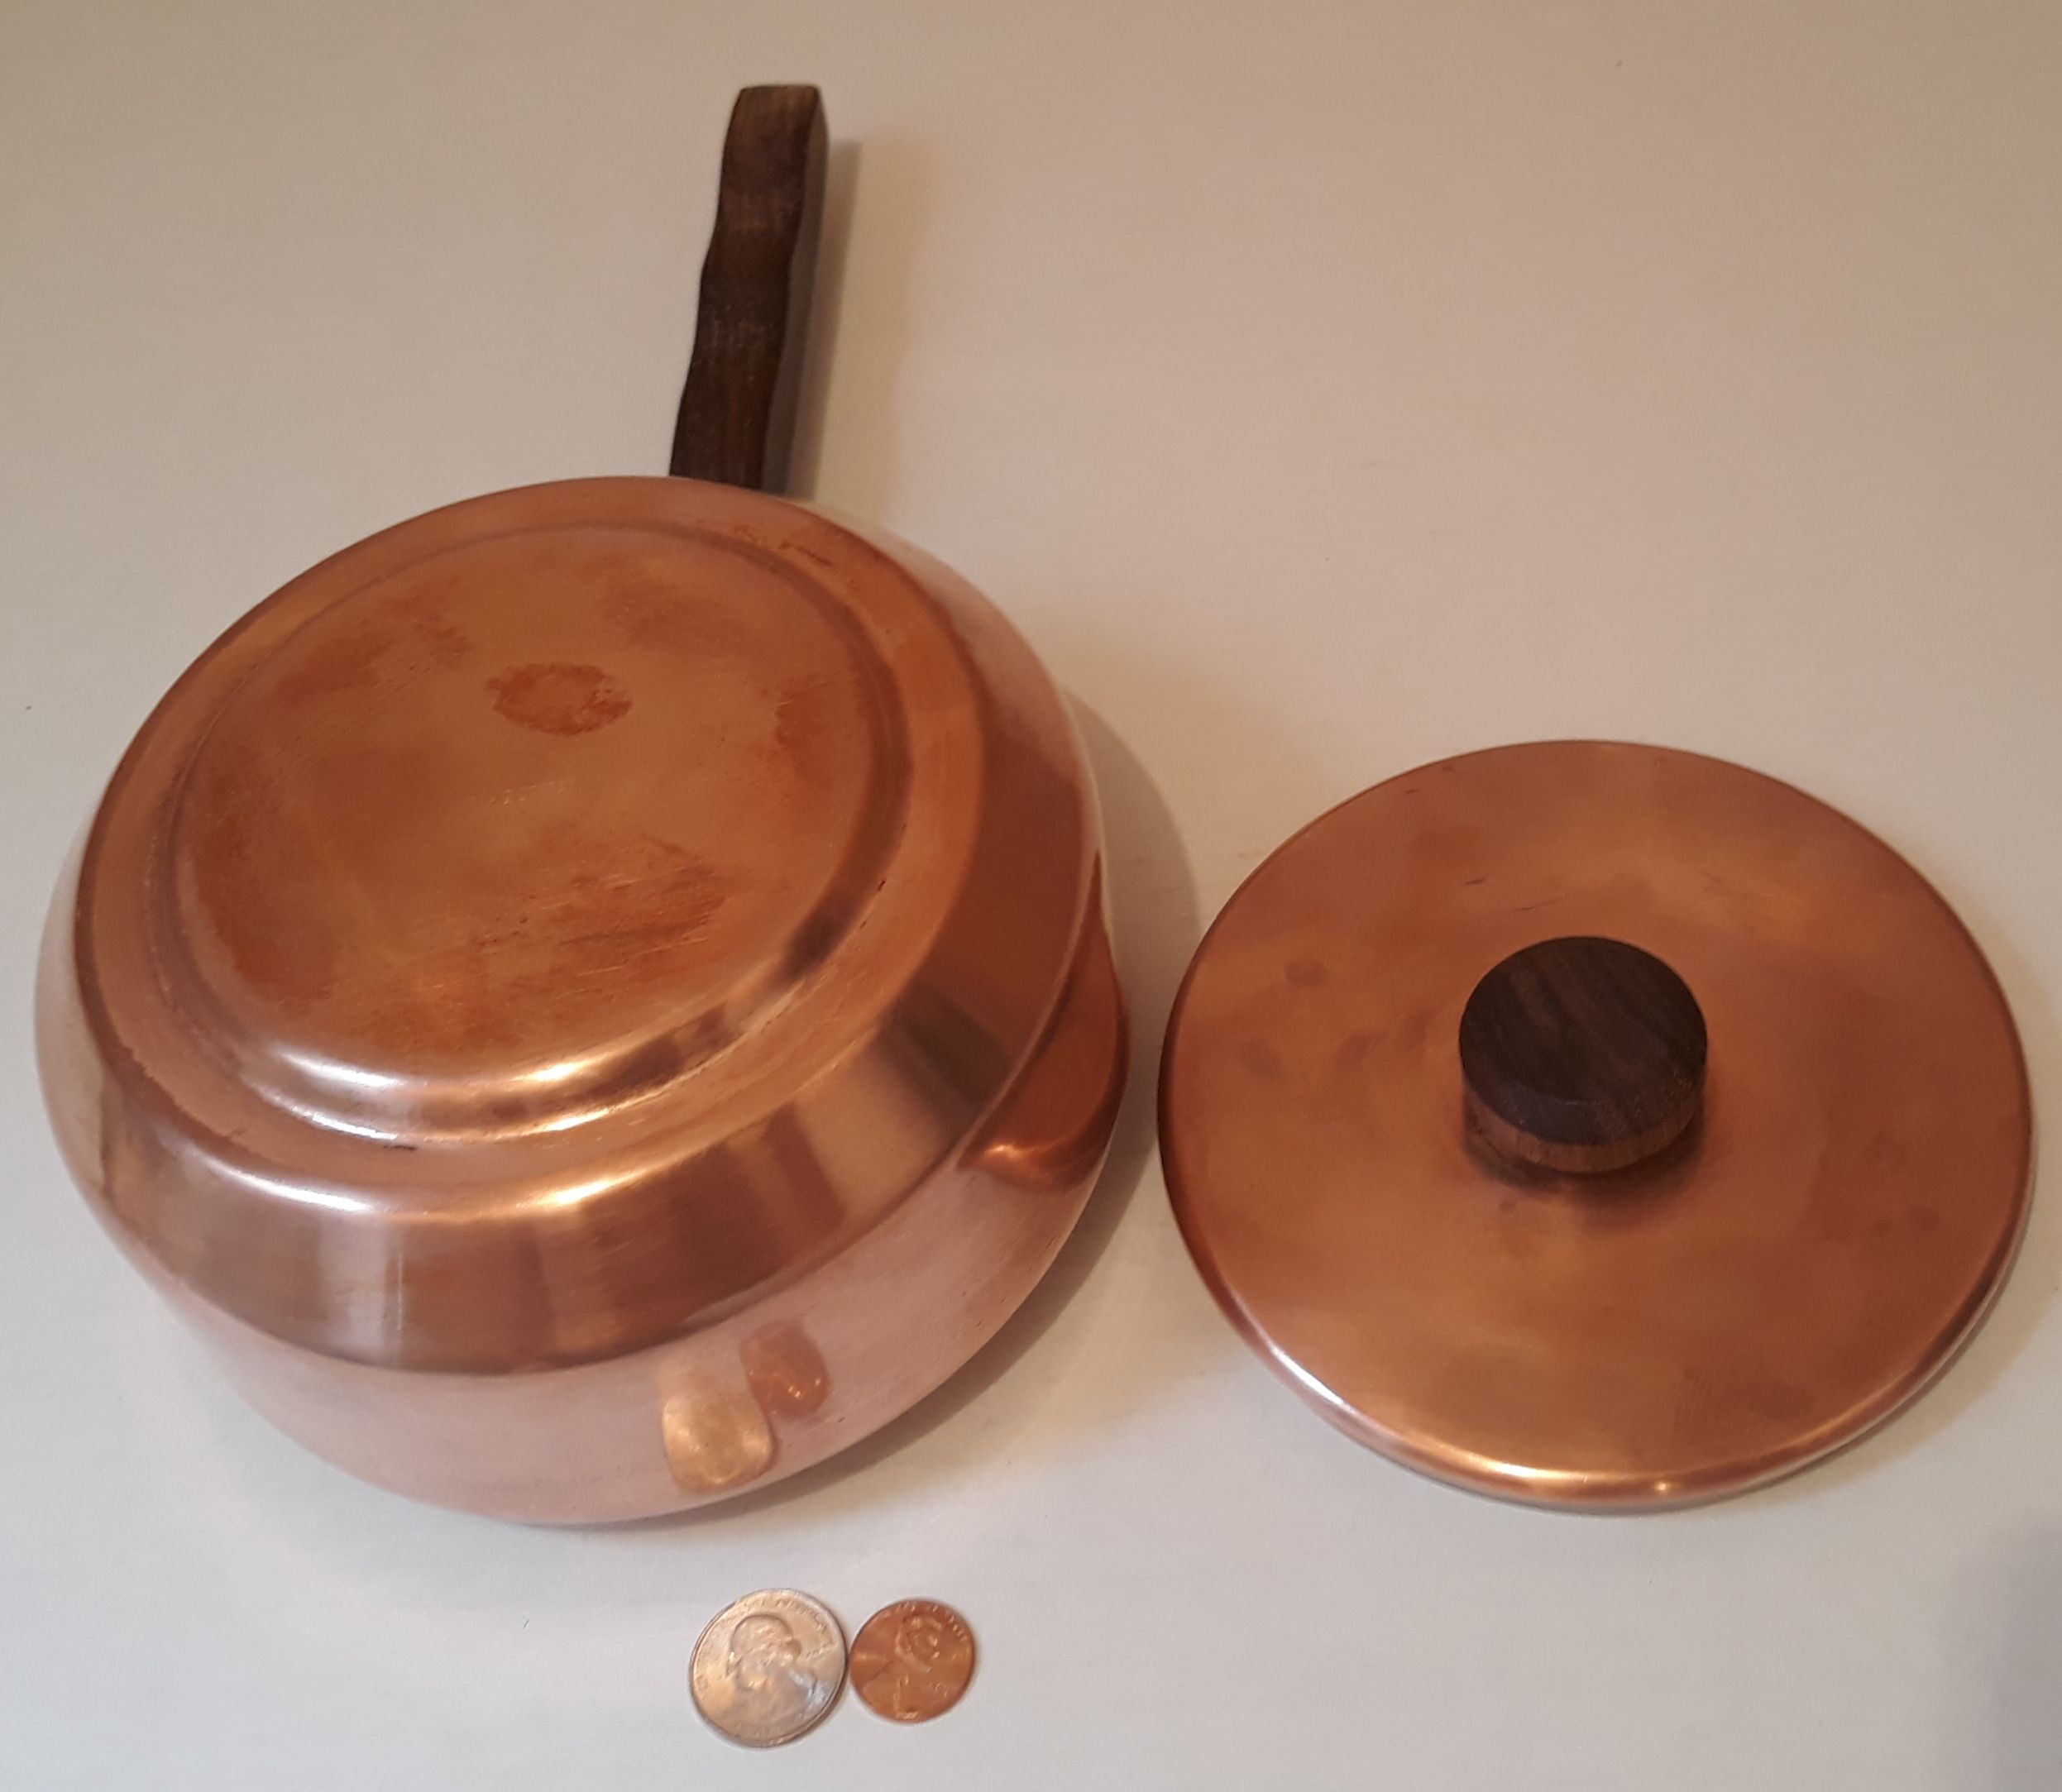 Vintage Metal Copper and Wood Handle Cooking Pot, Made in Japan, Quality Metal Copper Pot, 12 1/2" Long and 6" x 4" Pot Size, Kitchen Decor, Table